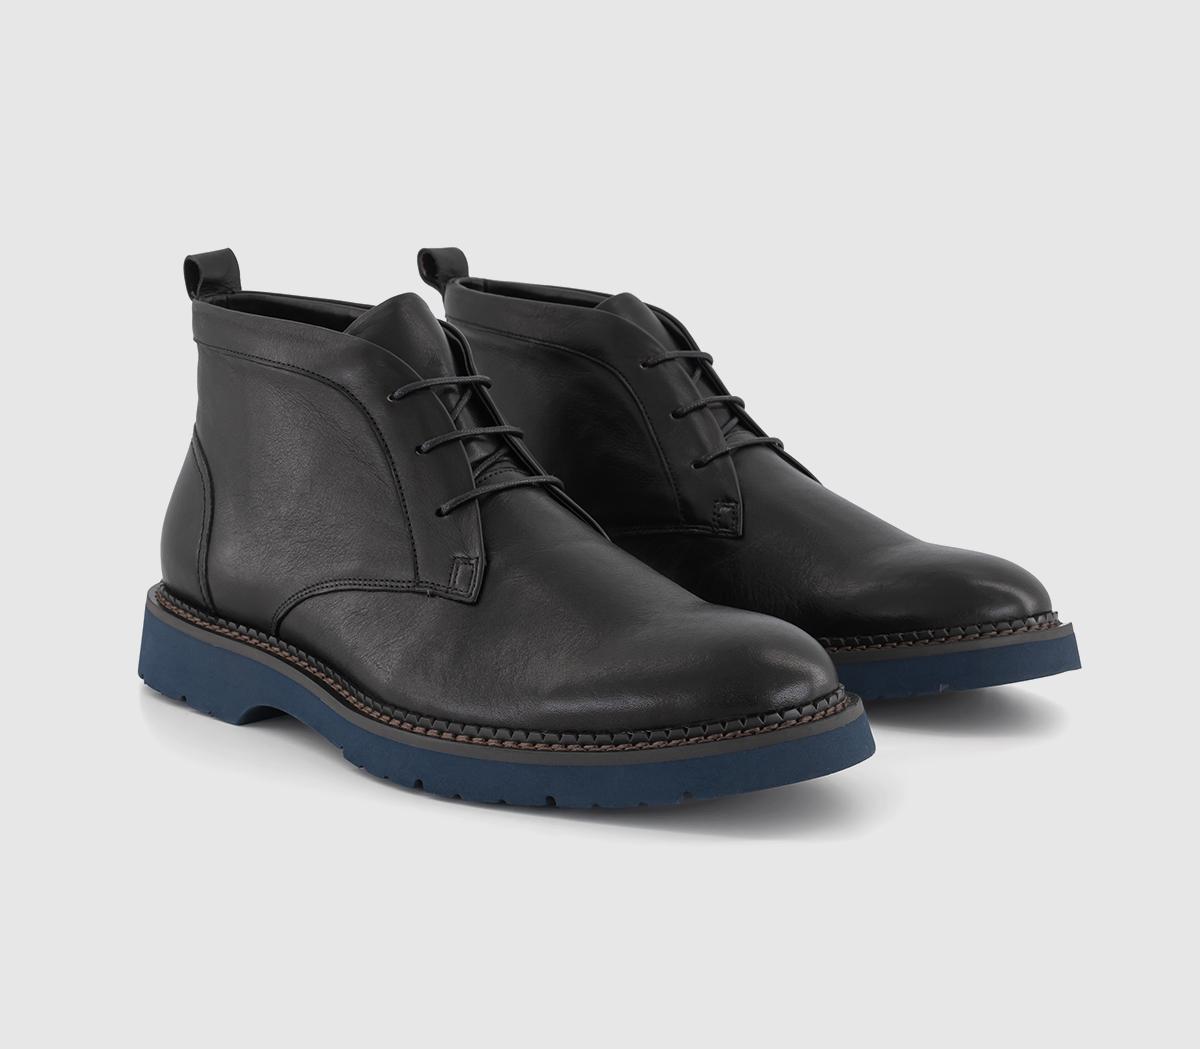 Poste Mens Petersham Contrast Outsole Chukka Boots Black Leather, 8